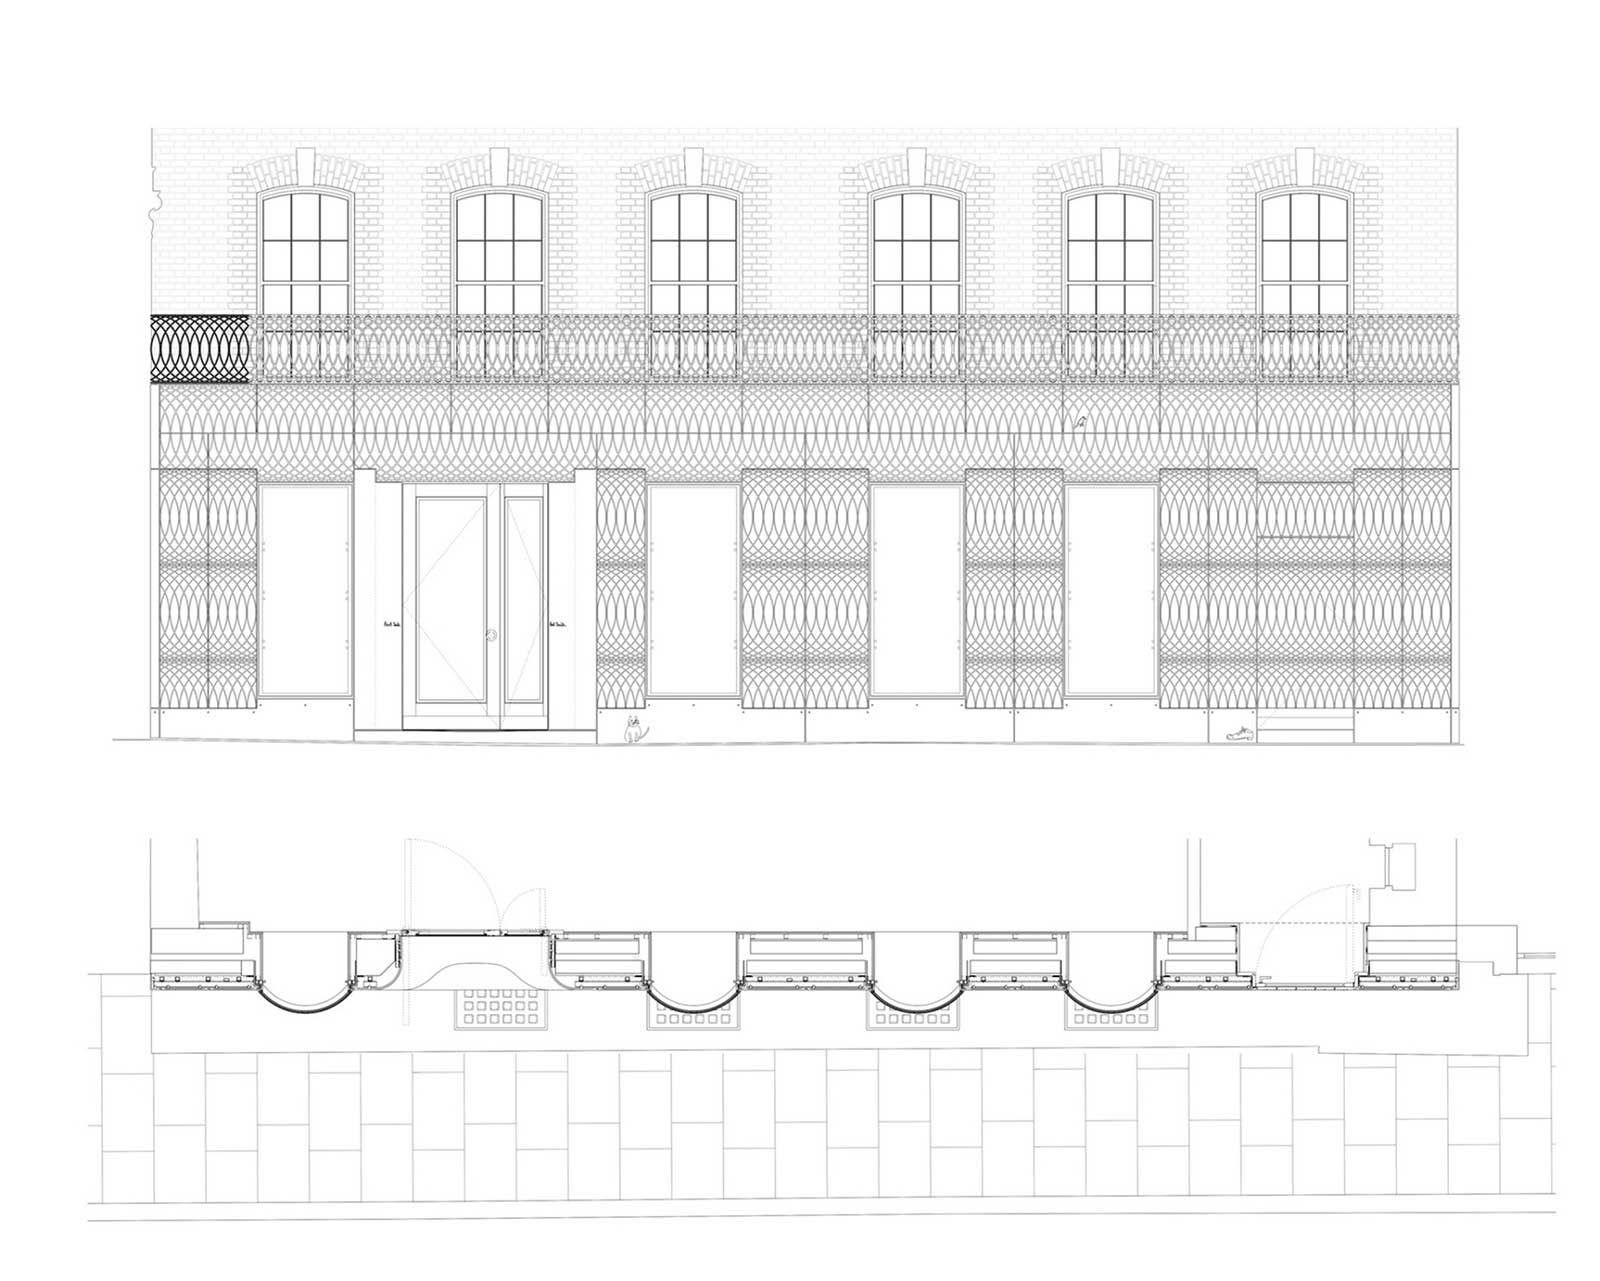 Elevation Plans Paul Smith Retail Shop in London / 6a architects